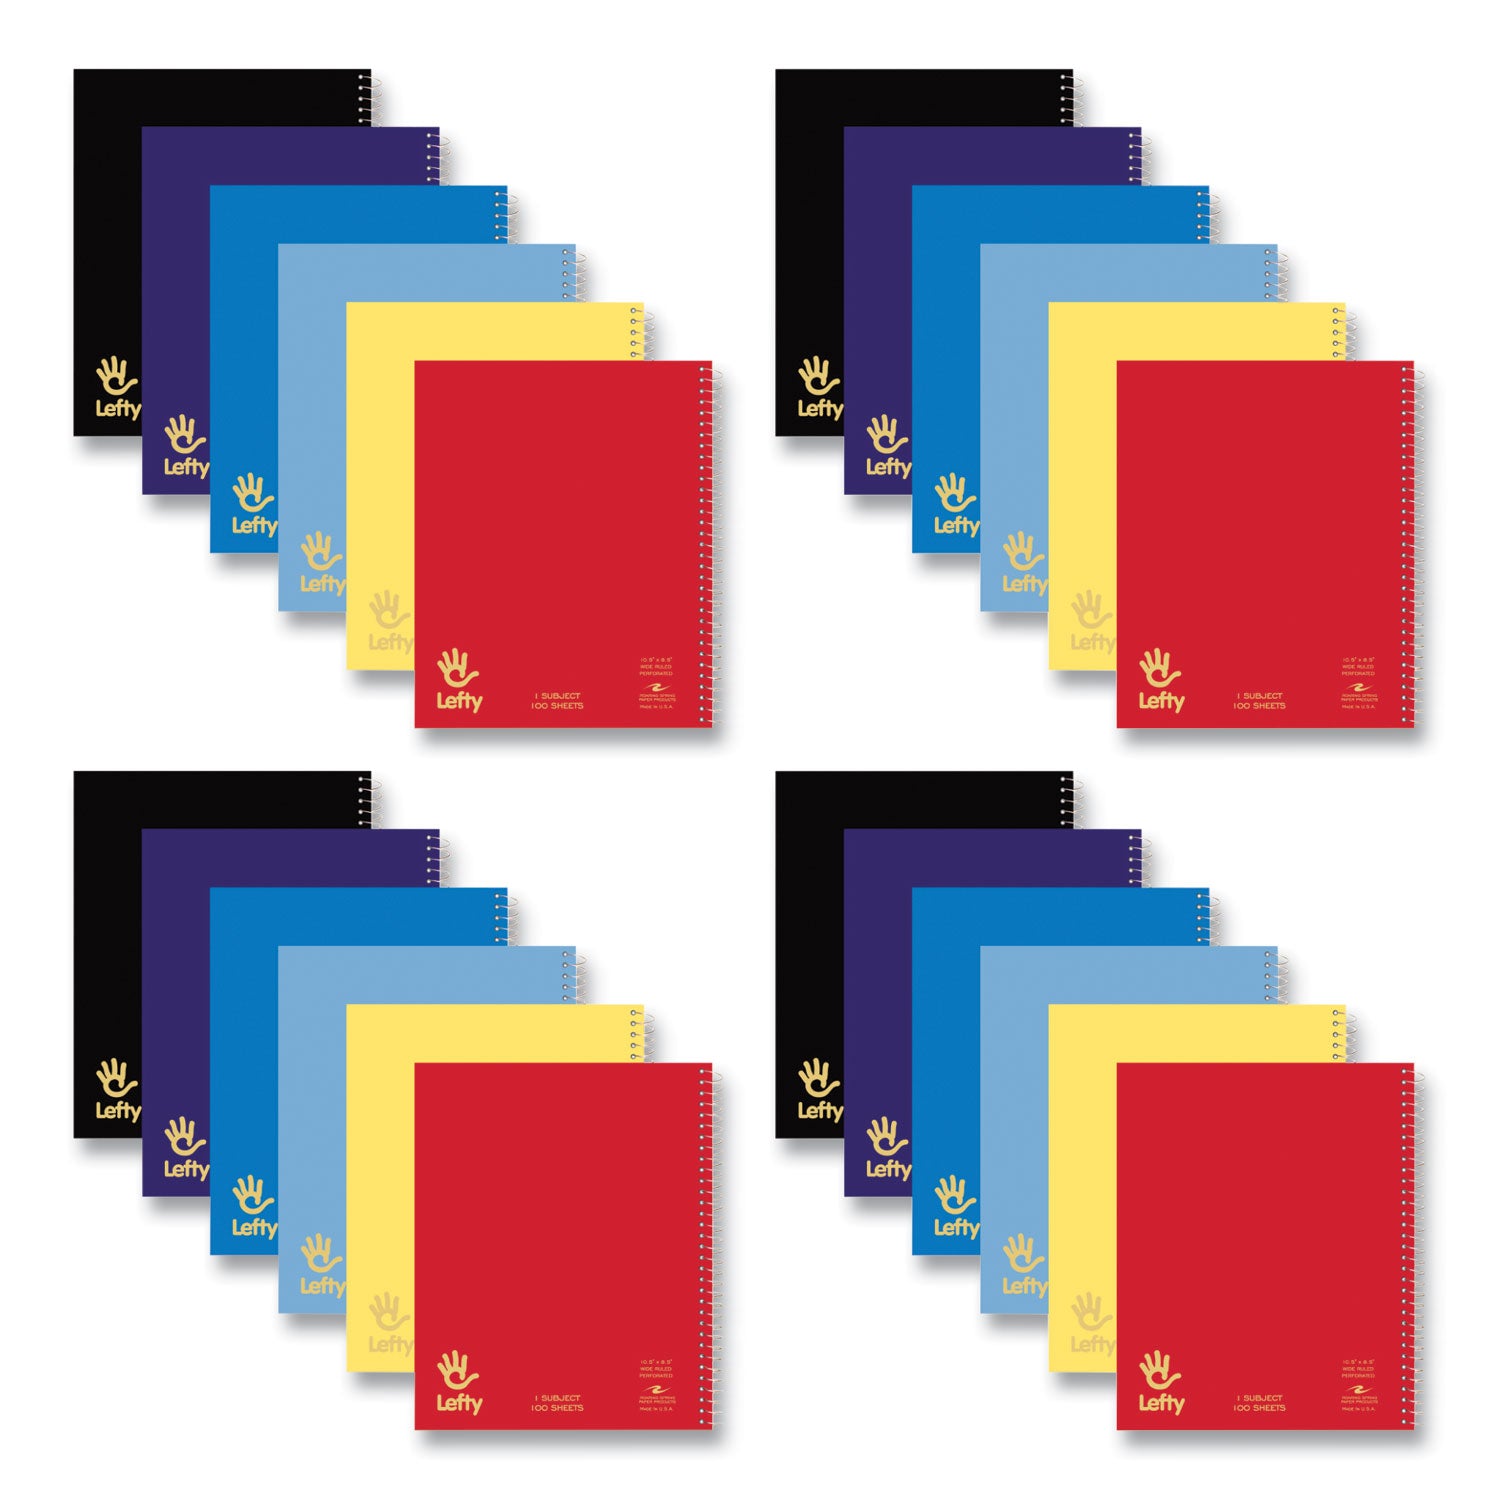 lefty-notebook-1-subject-wide-legal-rule-assorted-cover-colors-100-105-x-85-sheets-24-ct-ships-in-4-6-business-days_roa13505cs - 1